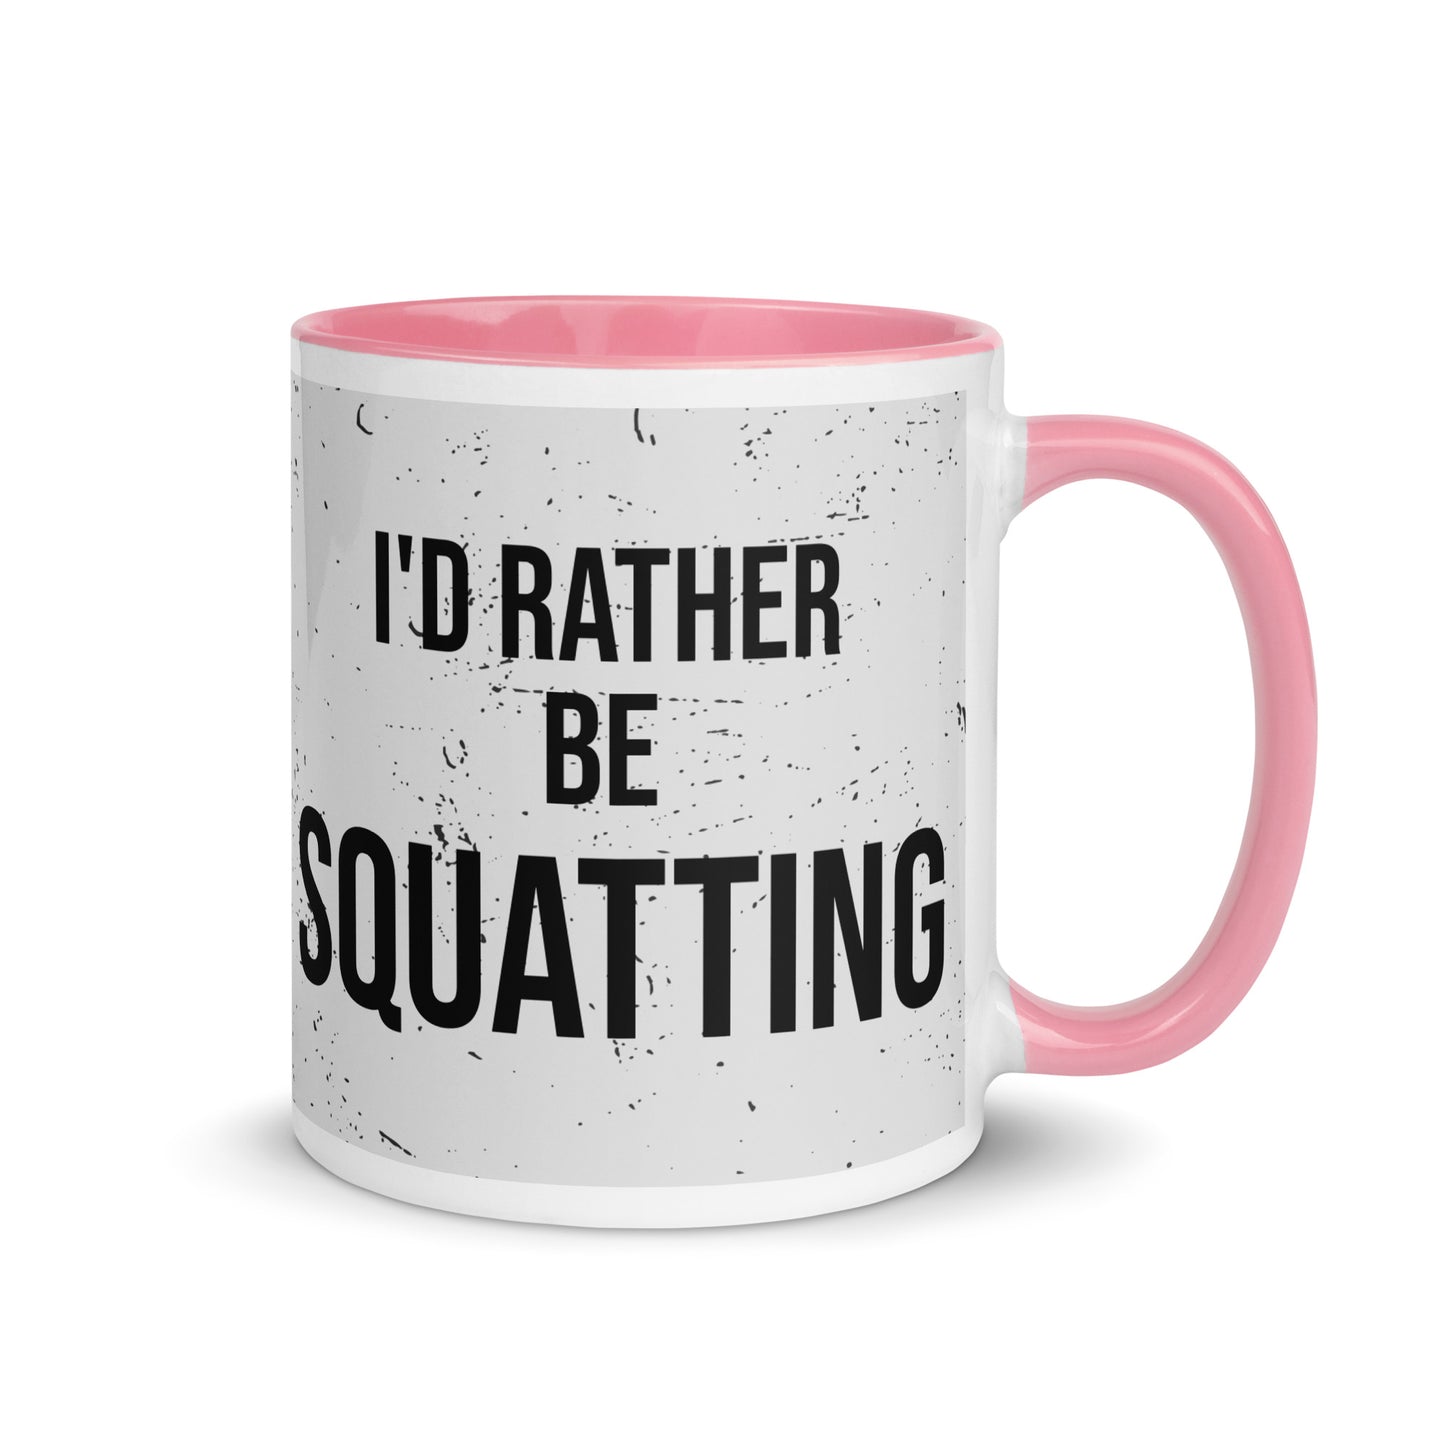 Pink handled mug with I'd rather be squatting written on it, across a grey splatter background. A gift for someone who loves the gym.